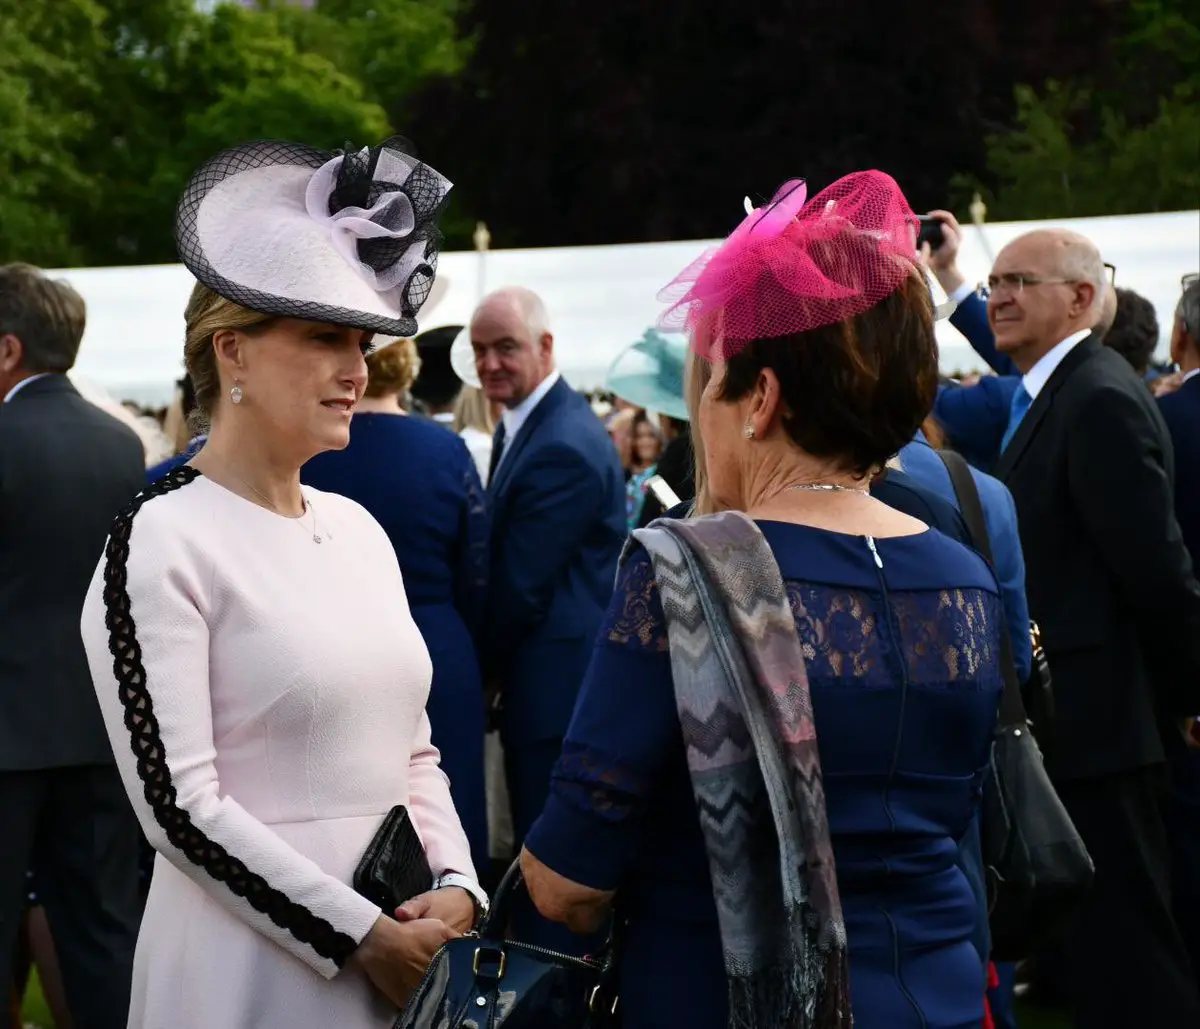 The other members joining Queen, William and Catherine for Tuesday's party were the Duke of York, Count and Countess of Wessex and Princess Alexandra. Today's garden party was attended by 8000 guests